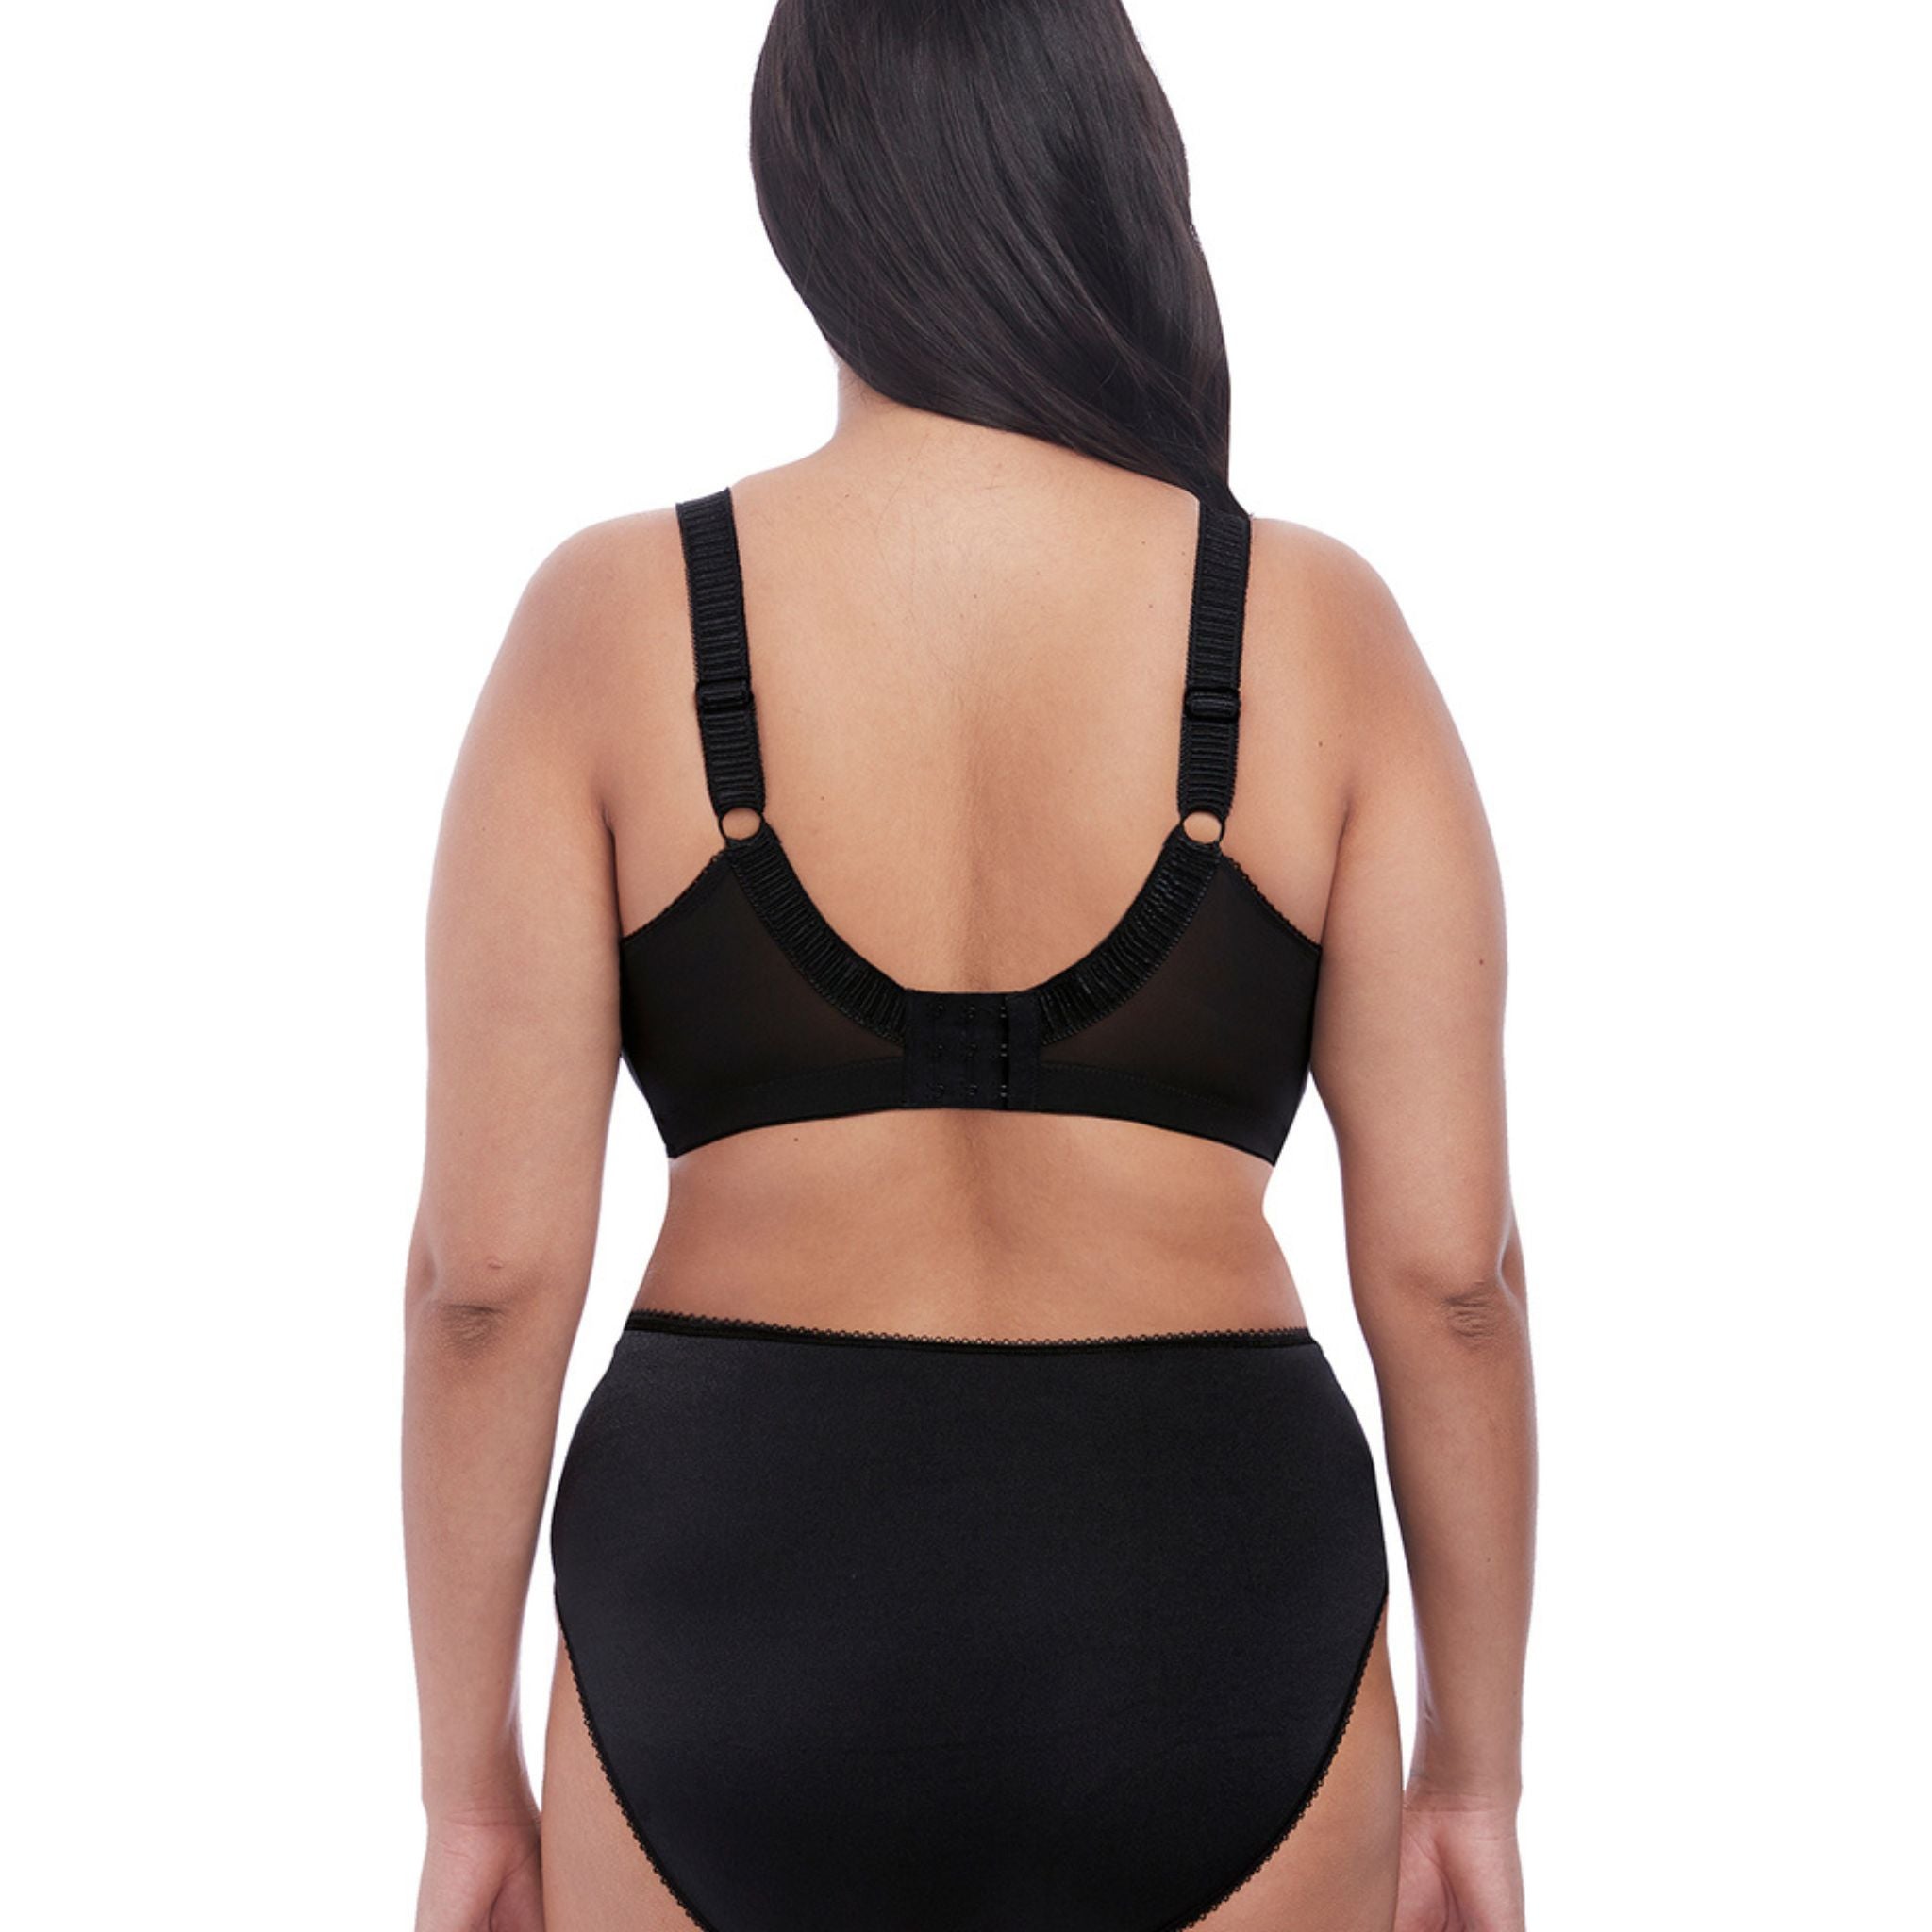 Build the perfect foundations with the signature Cate Soft Cup Bra in a sophisticated Black colourway. The elegant style combines sheer embroidery, soft satin cups and a chic arc design for a flattering look. A wide elastic under band and flexible side boning offers anchorage and support, while the three-piece cup provides perfect forward shaping, uplift and separation in cup sizes B - G.